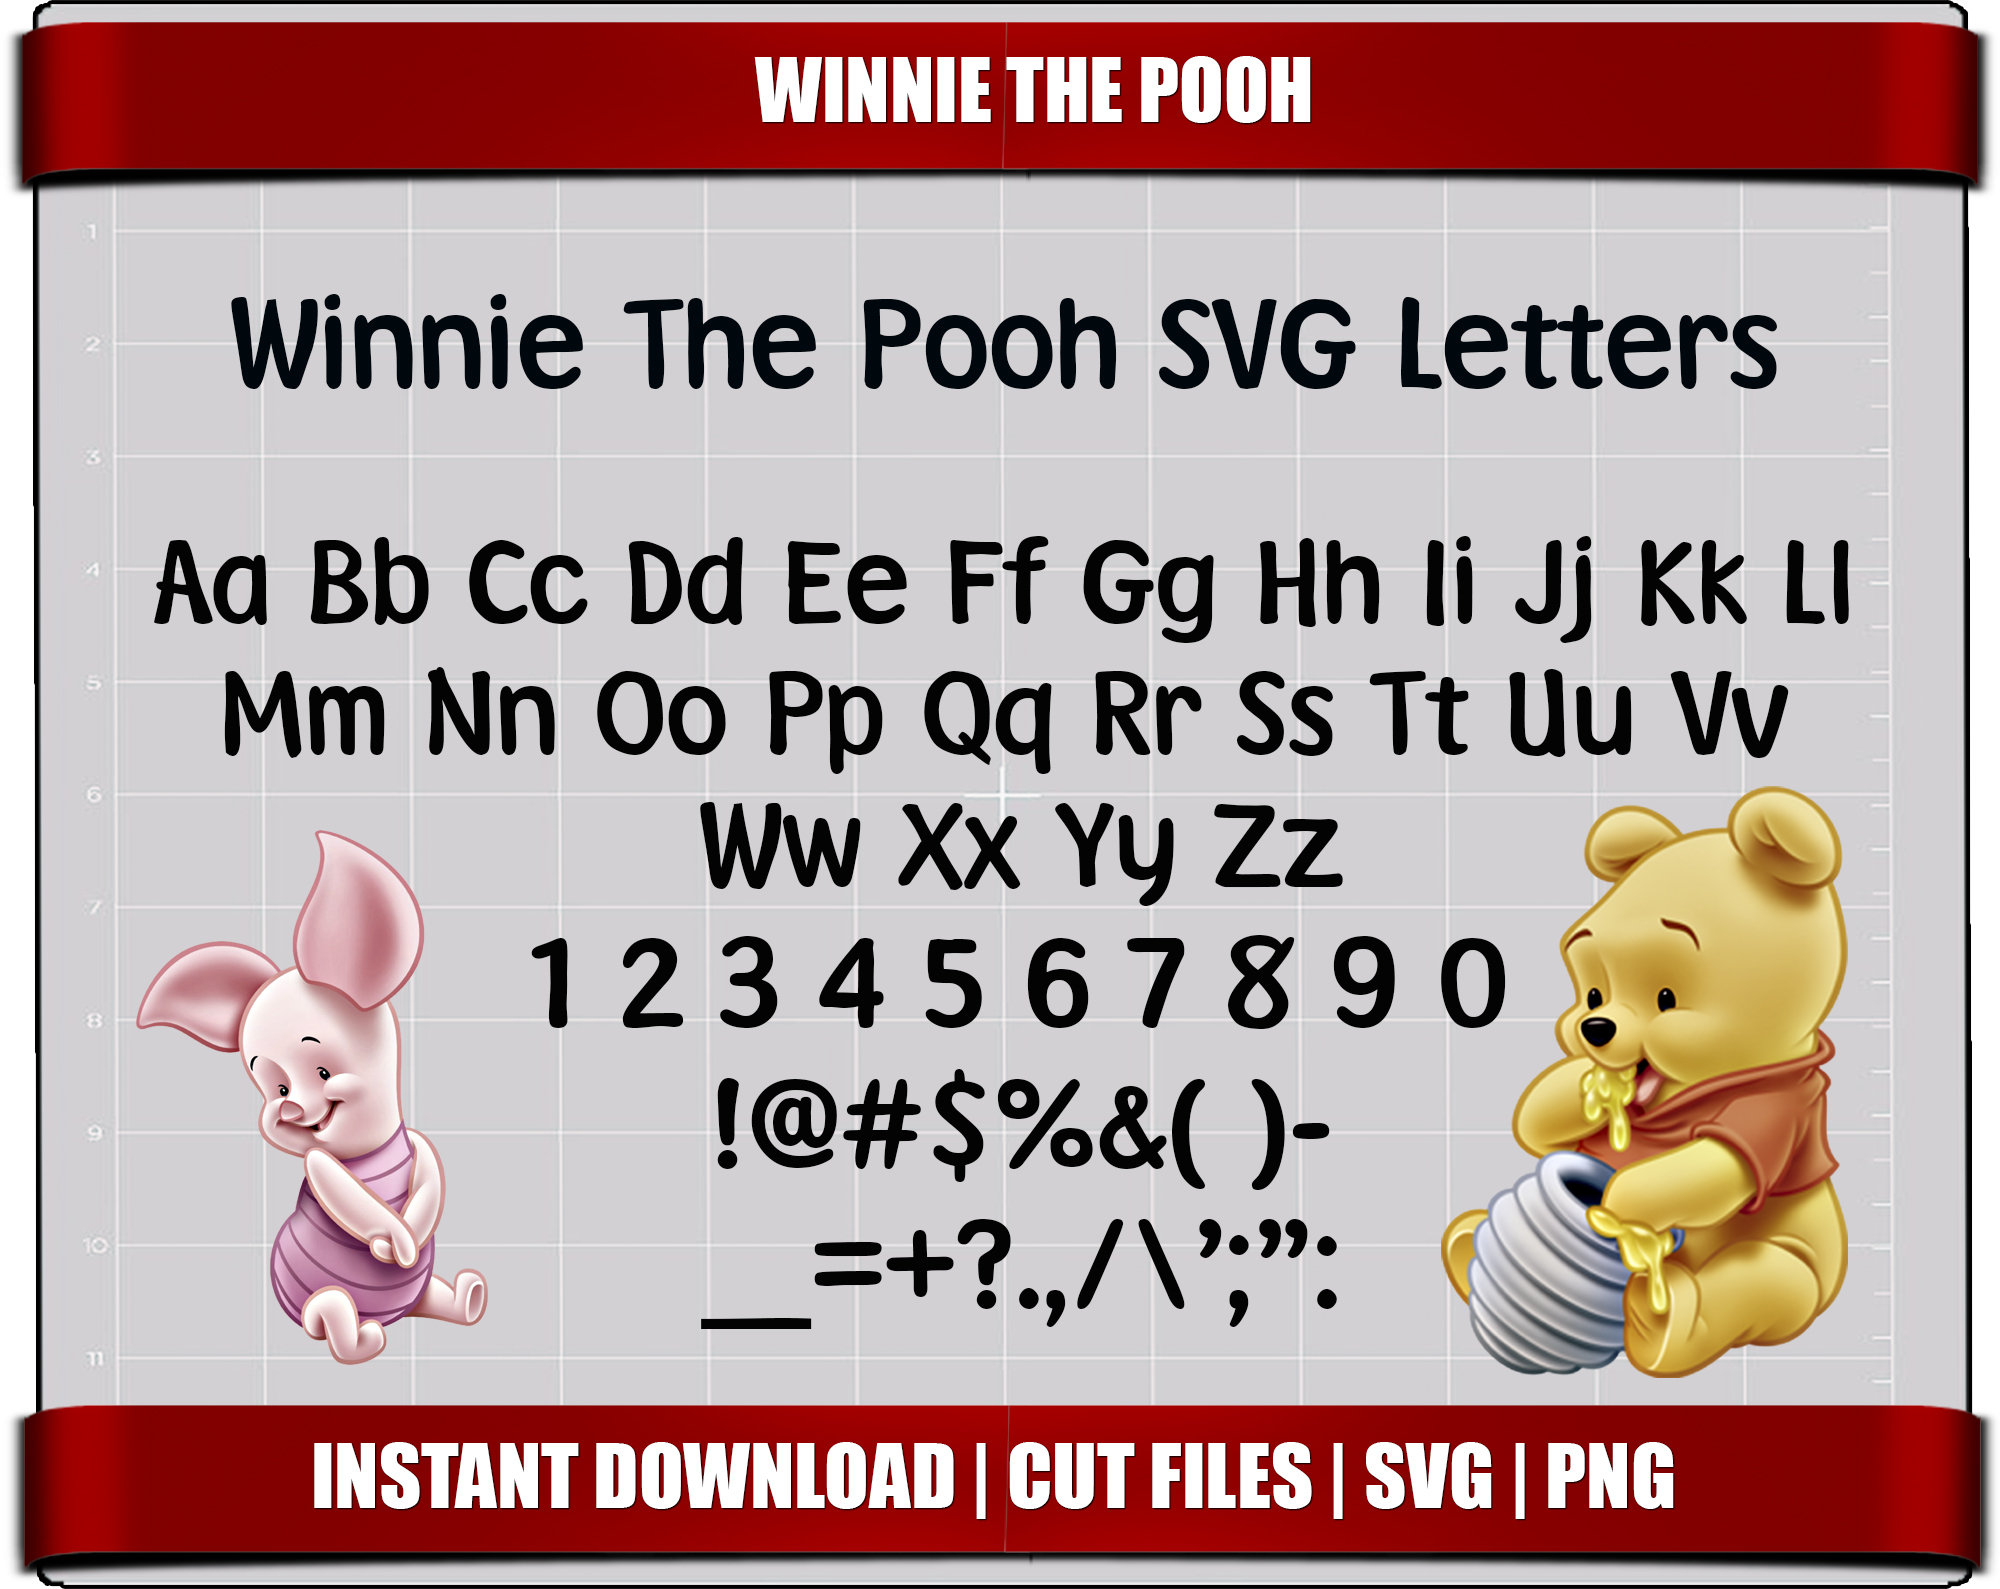 Winnie The Pooh Baby Svg, Cut File, Cricut, Png, Vector - Vectplace